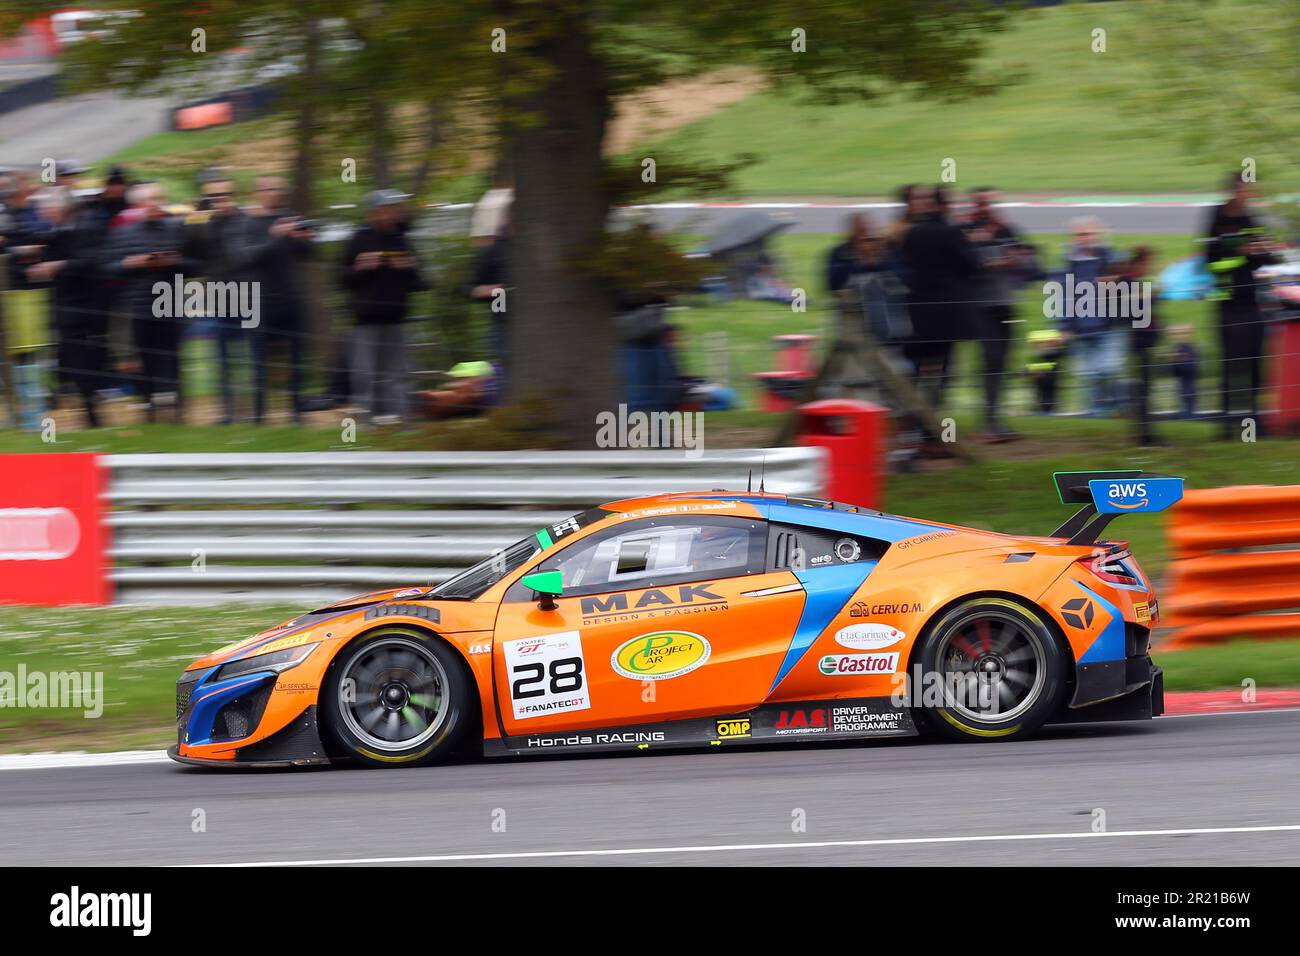 Jacopo Guidetti - Nova Race -  driving Honda NSX GT3 number 28 in the 2023 GT World Challenge Europe Sprint Cup at Brands Hatch in May 2023 Stock Photo